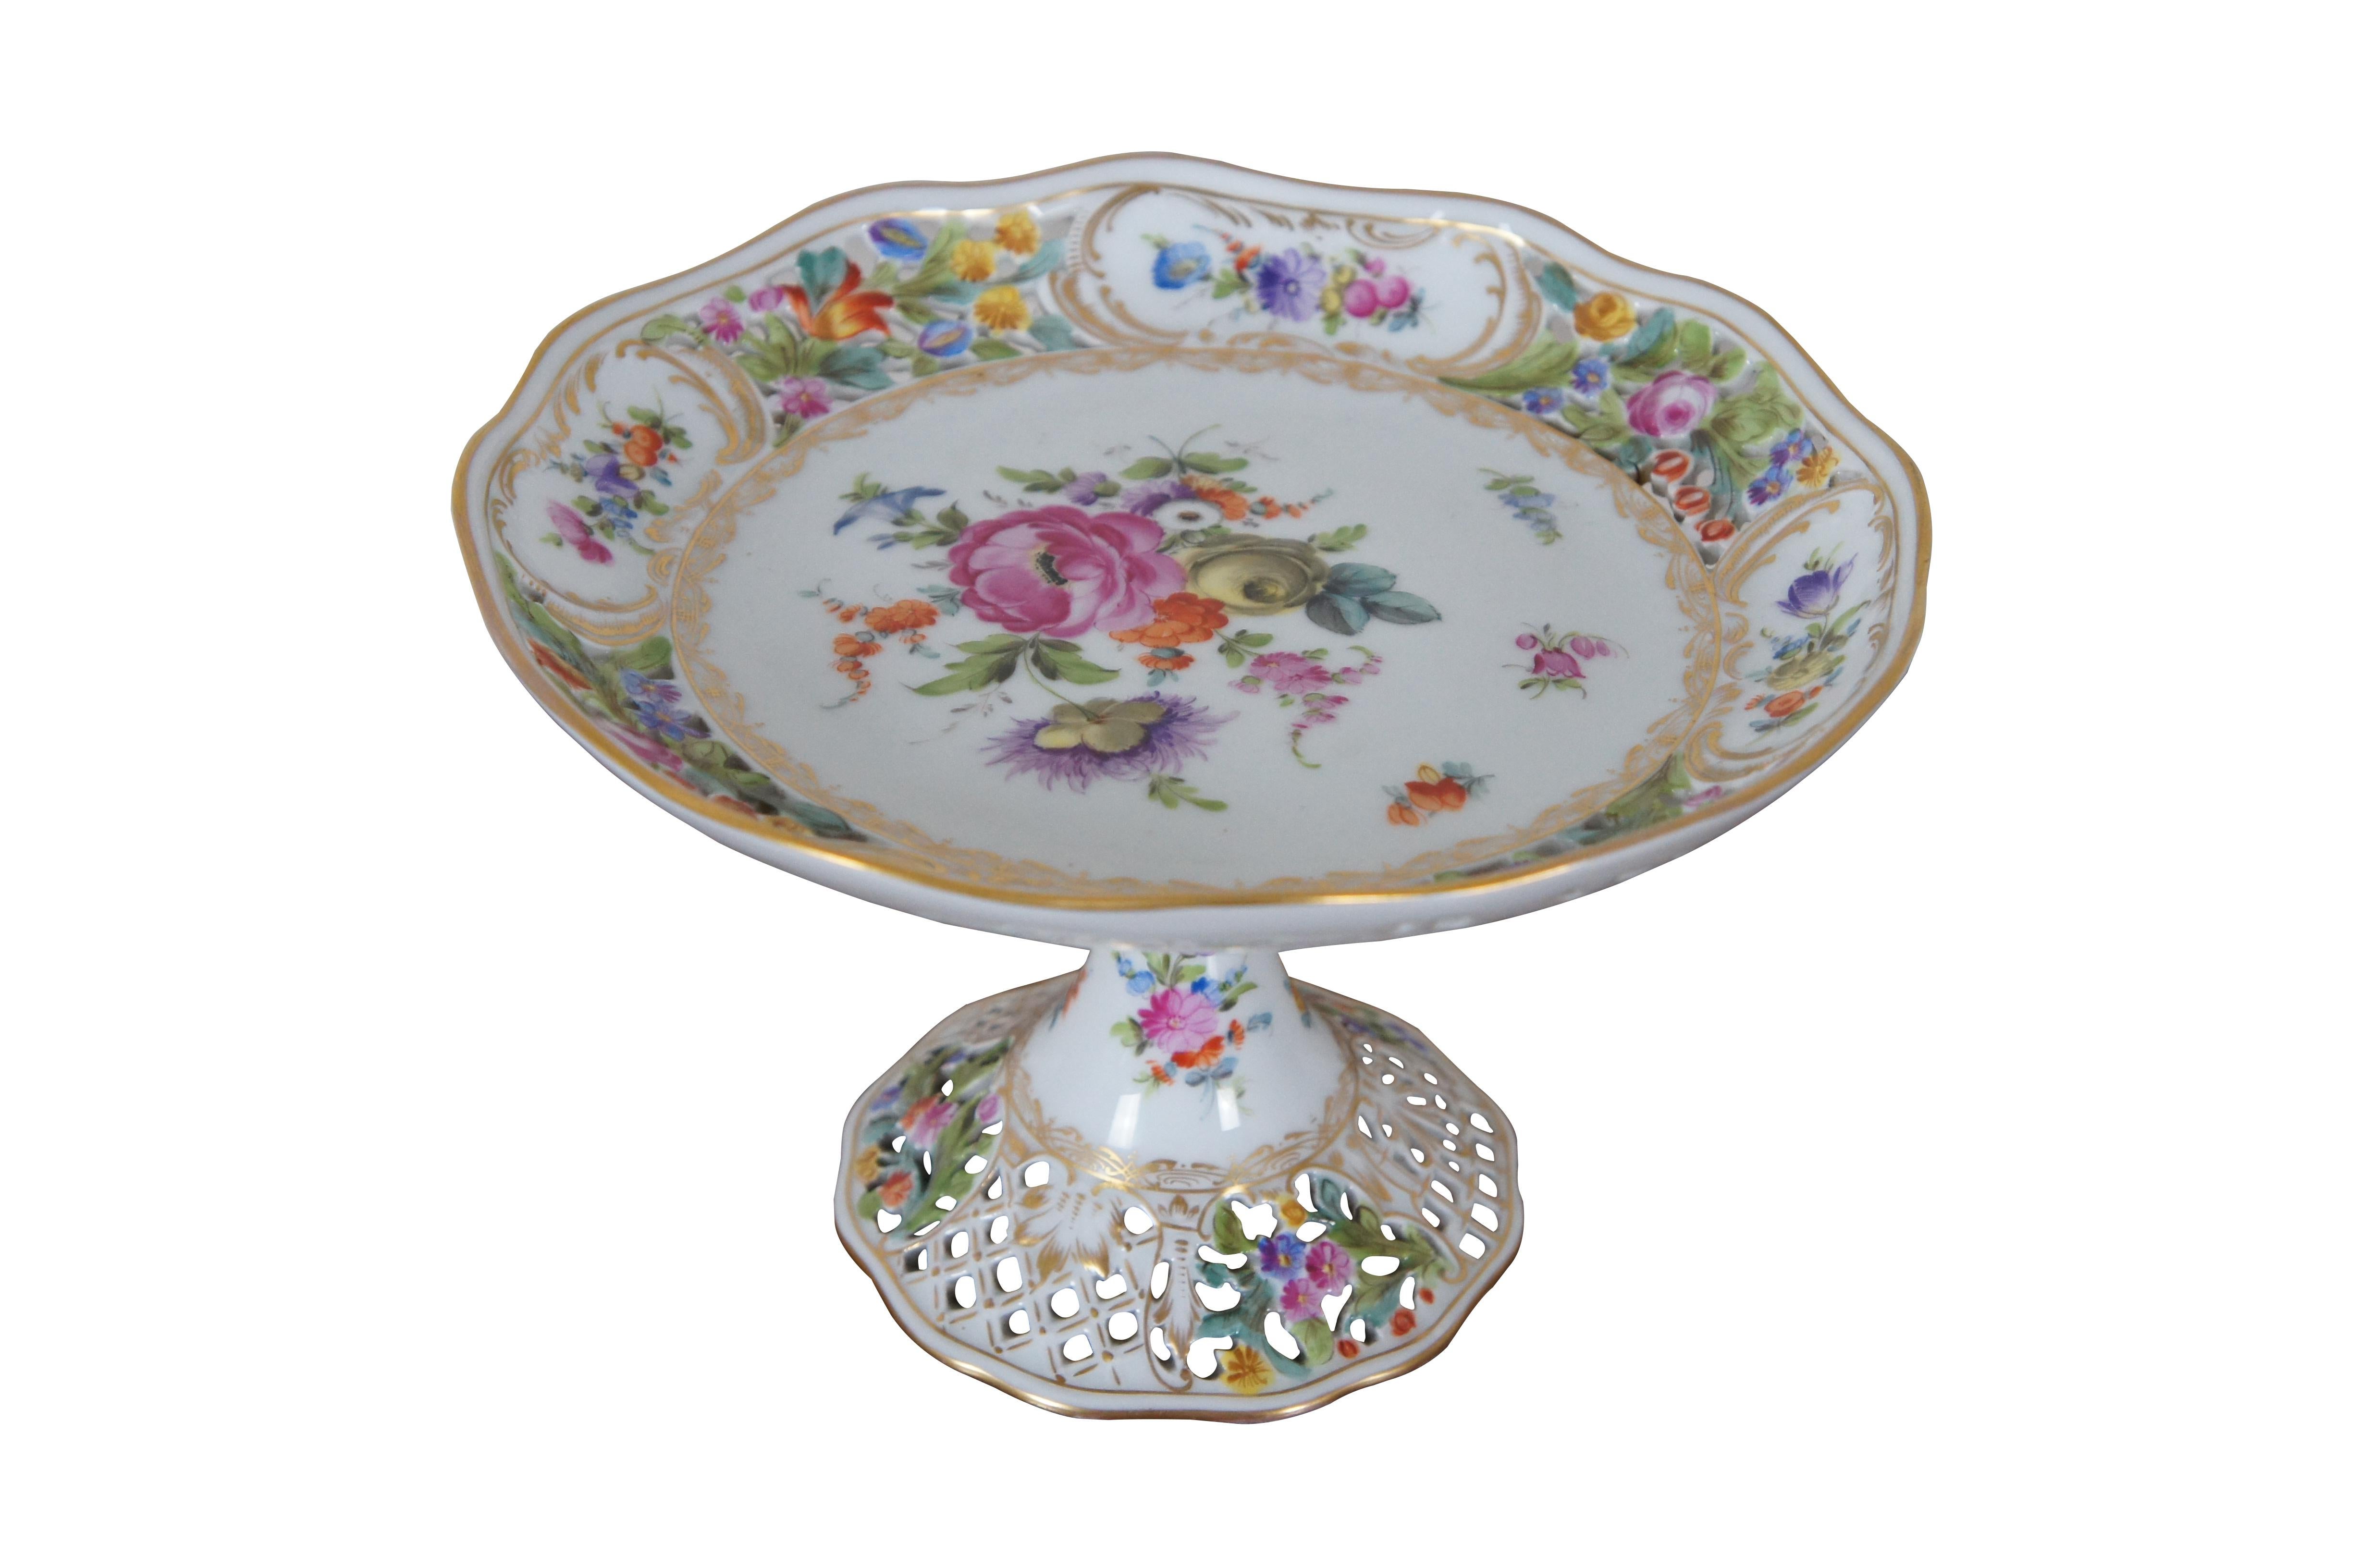 Antique Carl Thieme German Dresden centerpiece serving compote.  Made of porcelain featuring footed pedestal base and reticulated / pierced scalloped shallow bowl or cake plate with floral design.  Circa 1902-1920.

The Sächsische